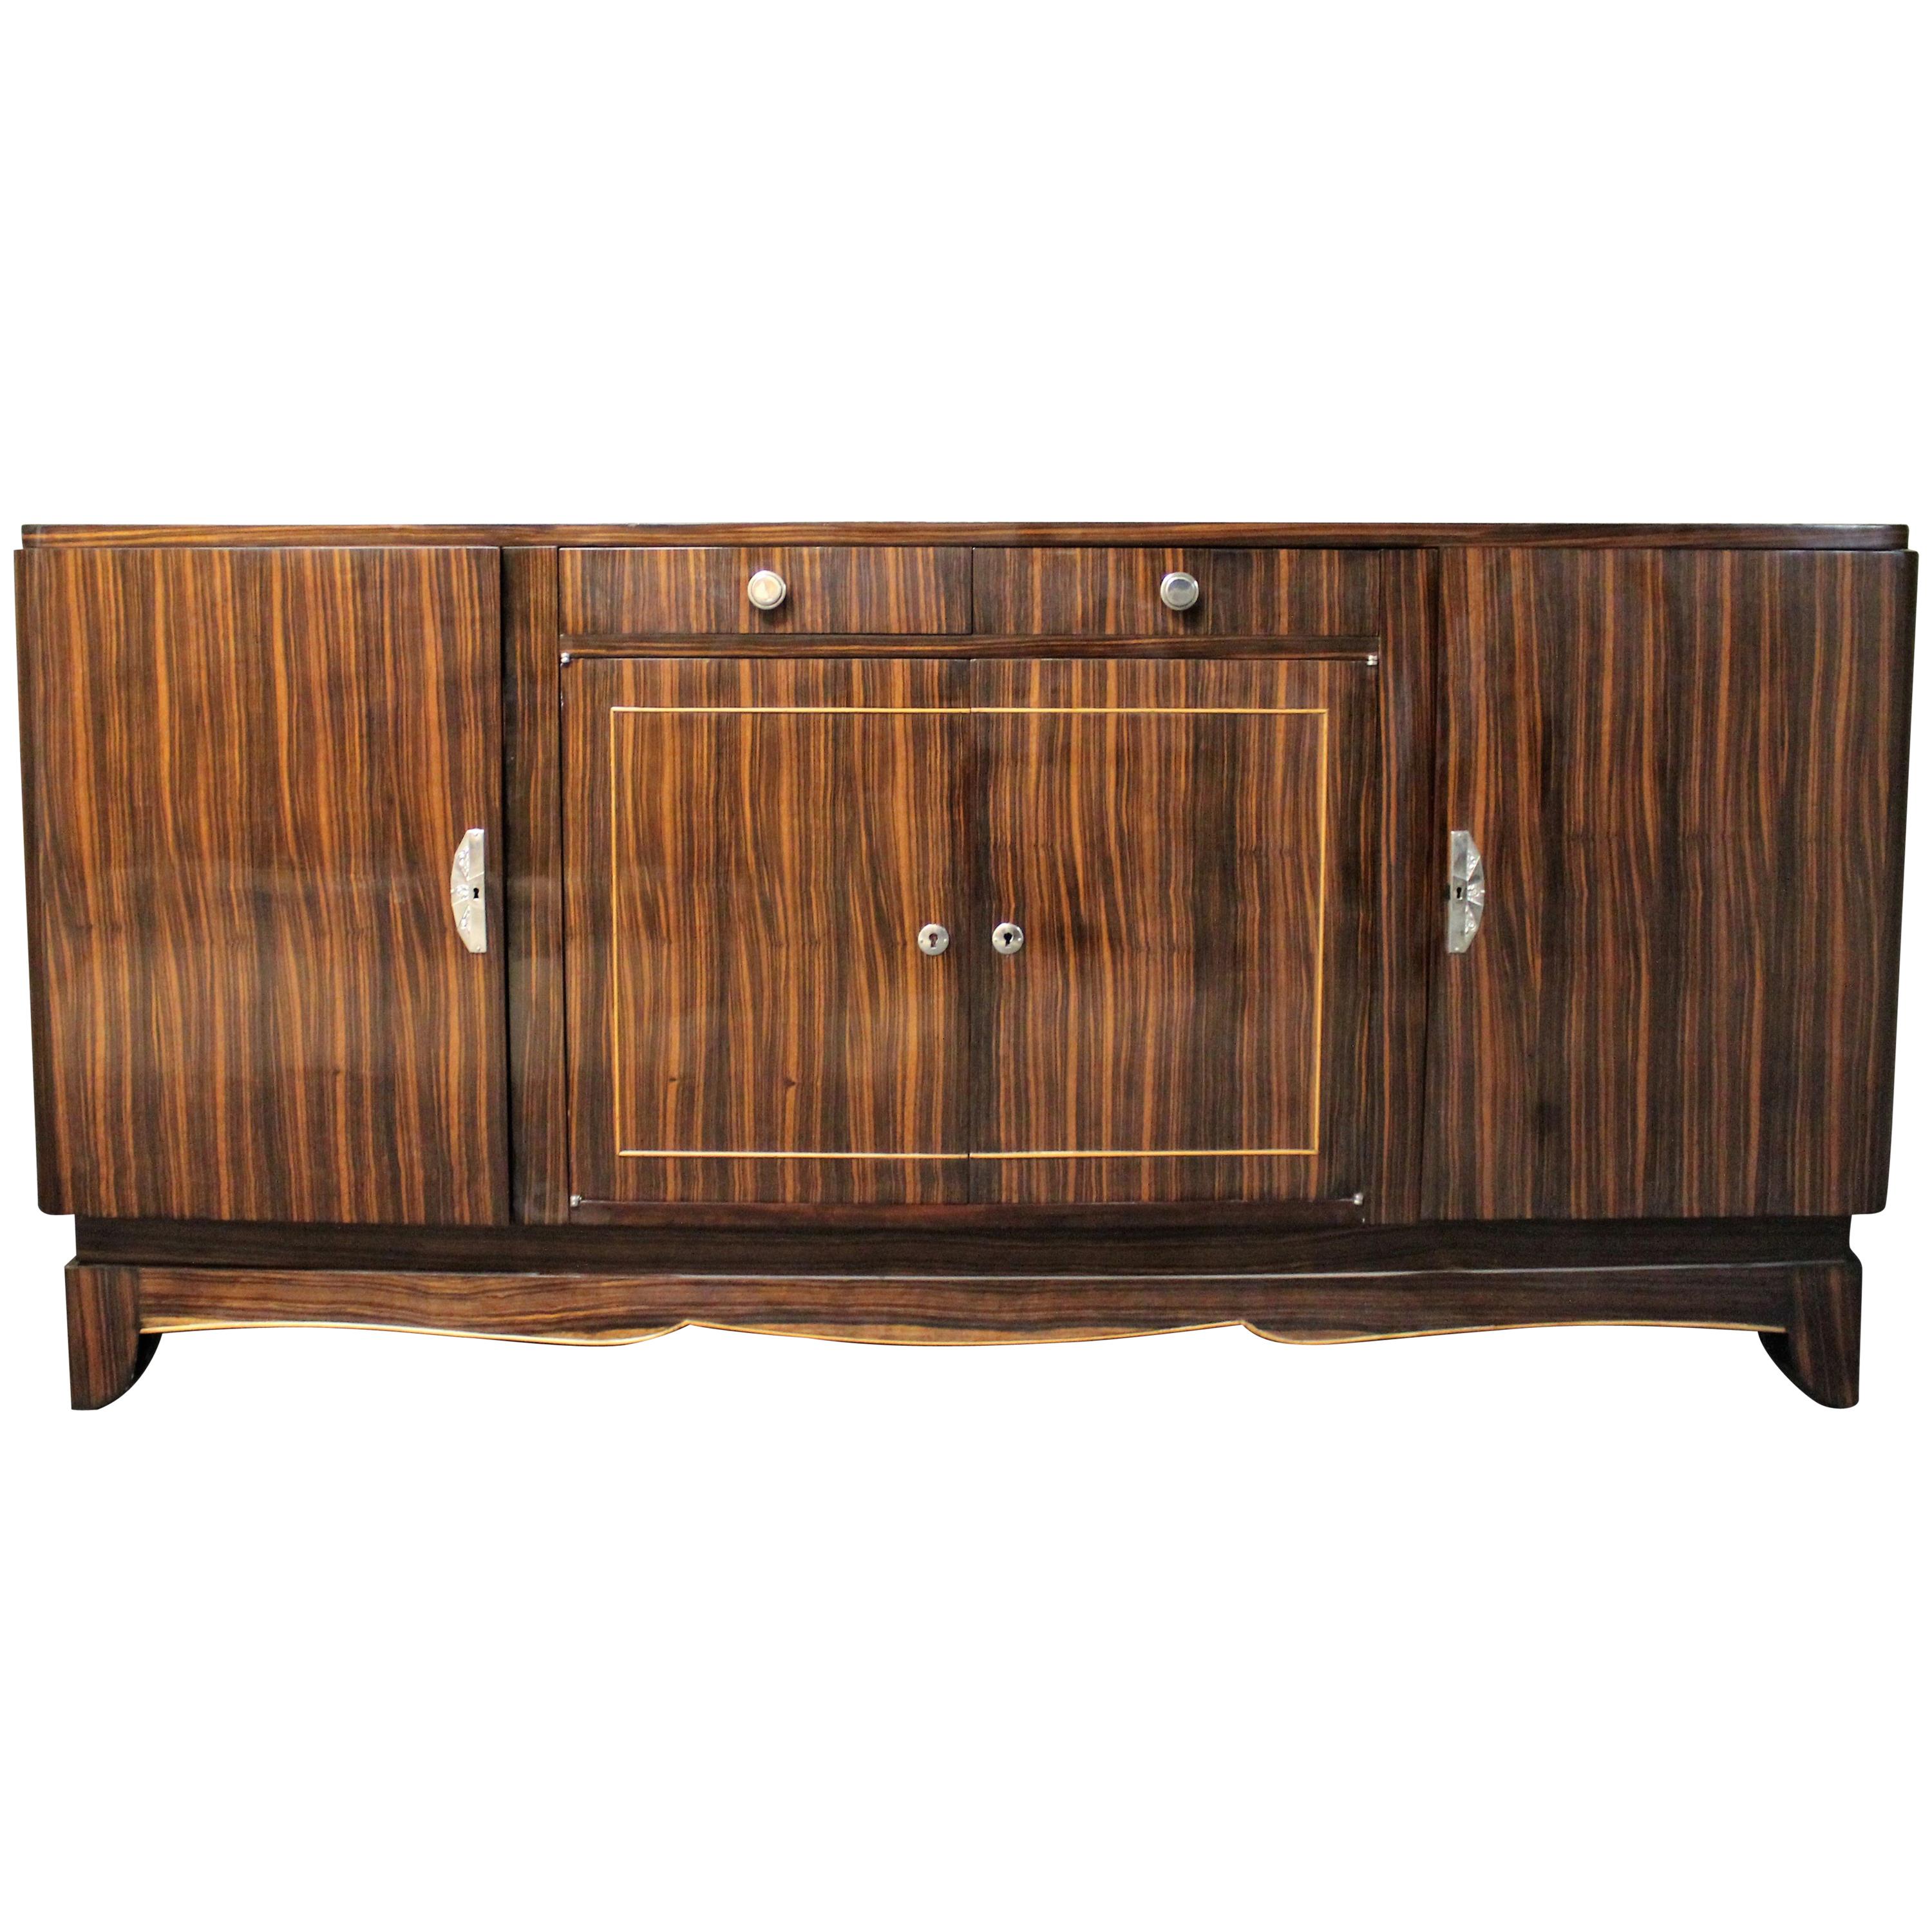 Art Deco Macassar Ebony Credenza in the Manner of Émile-Jacques Ruhlmann